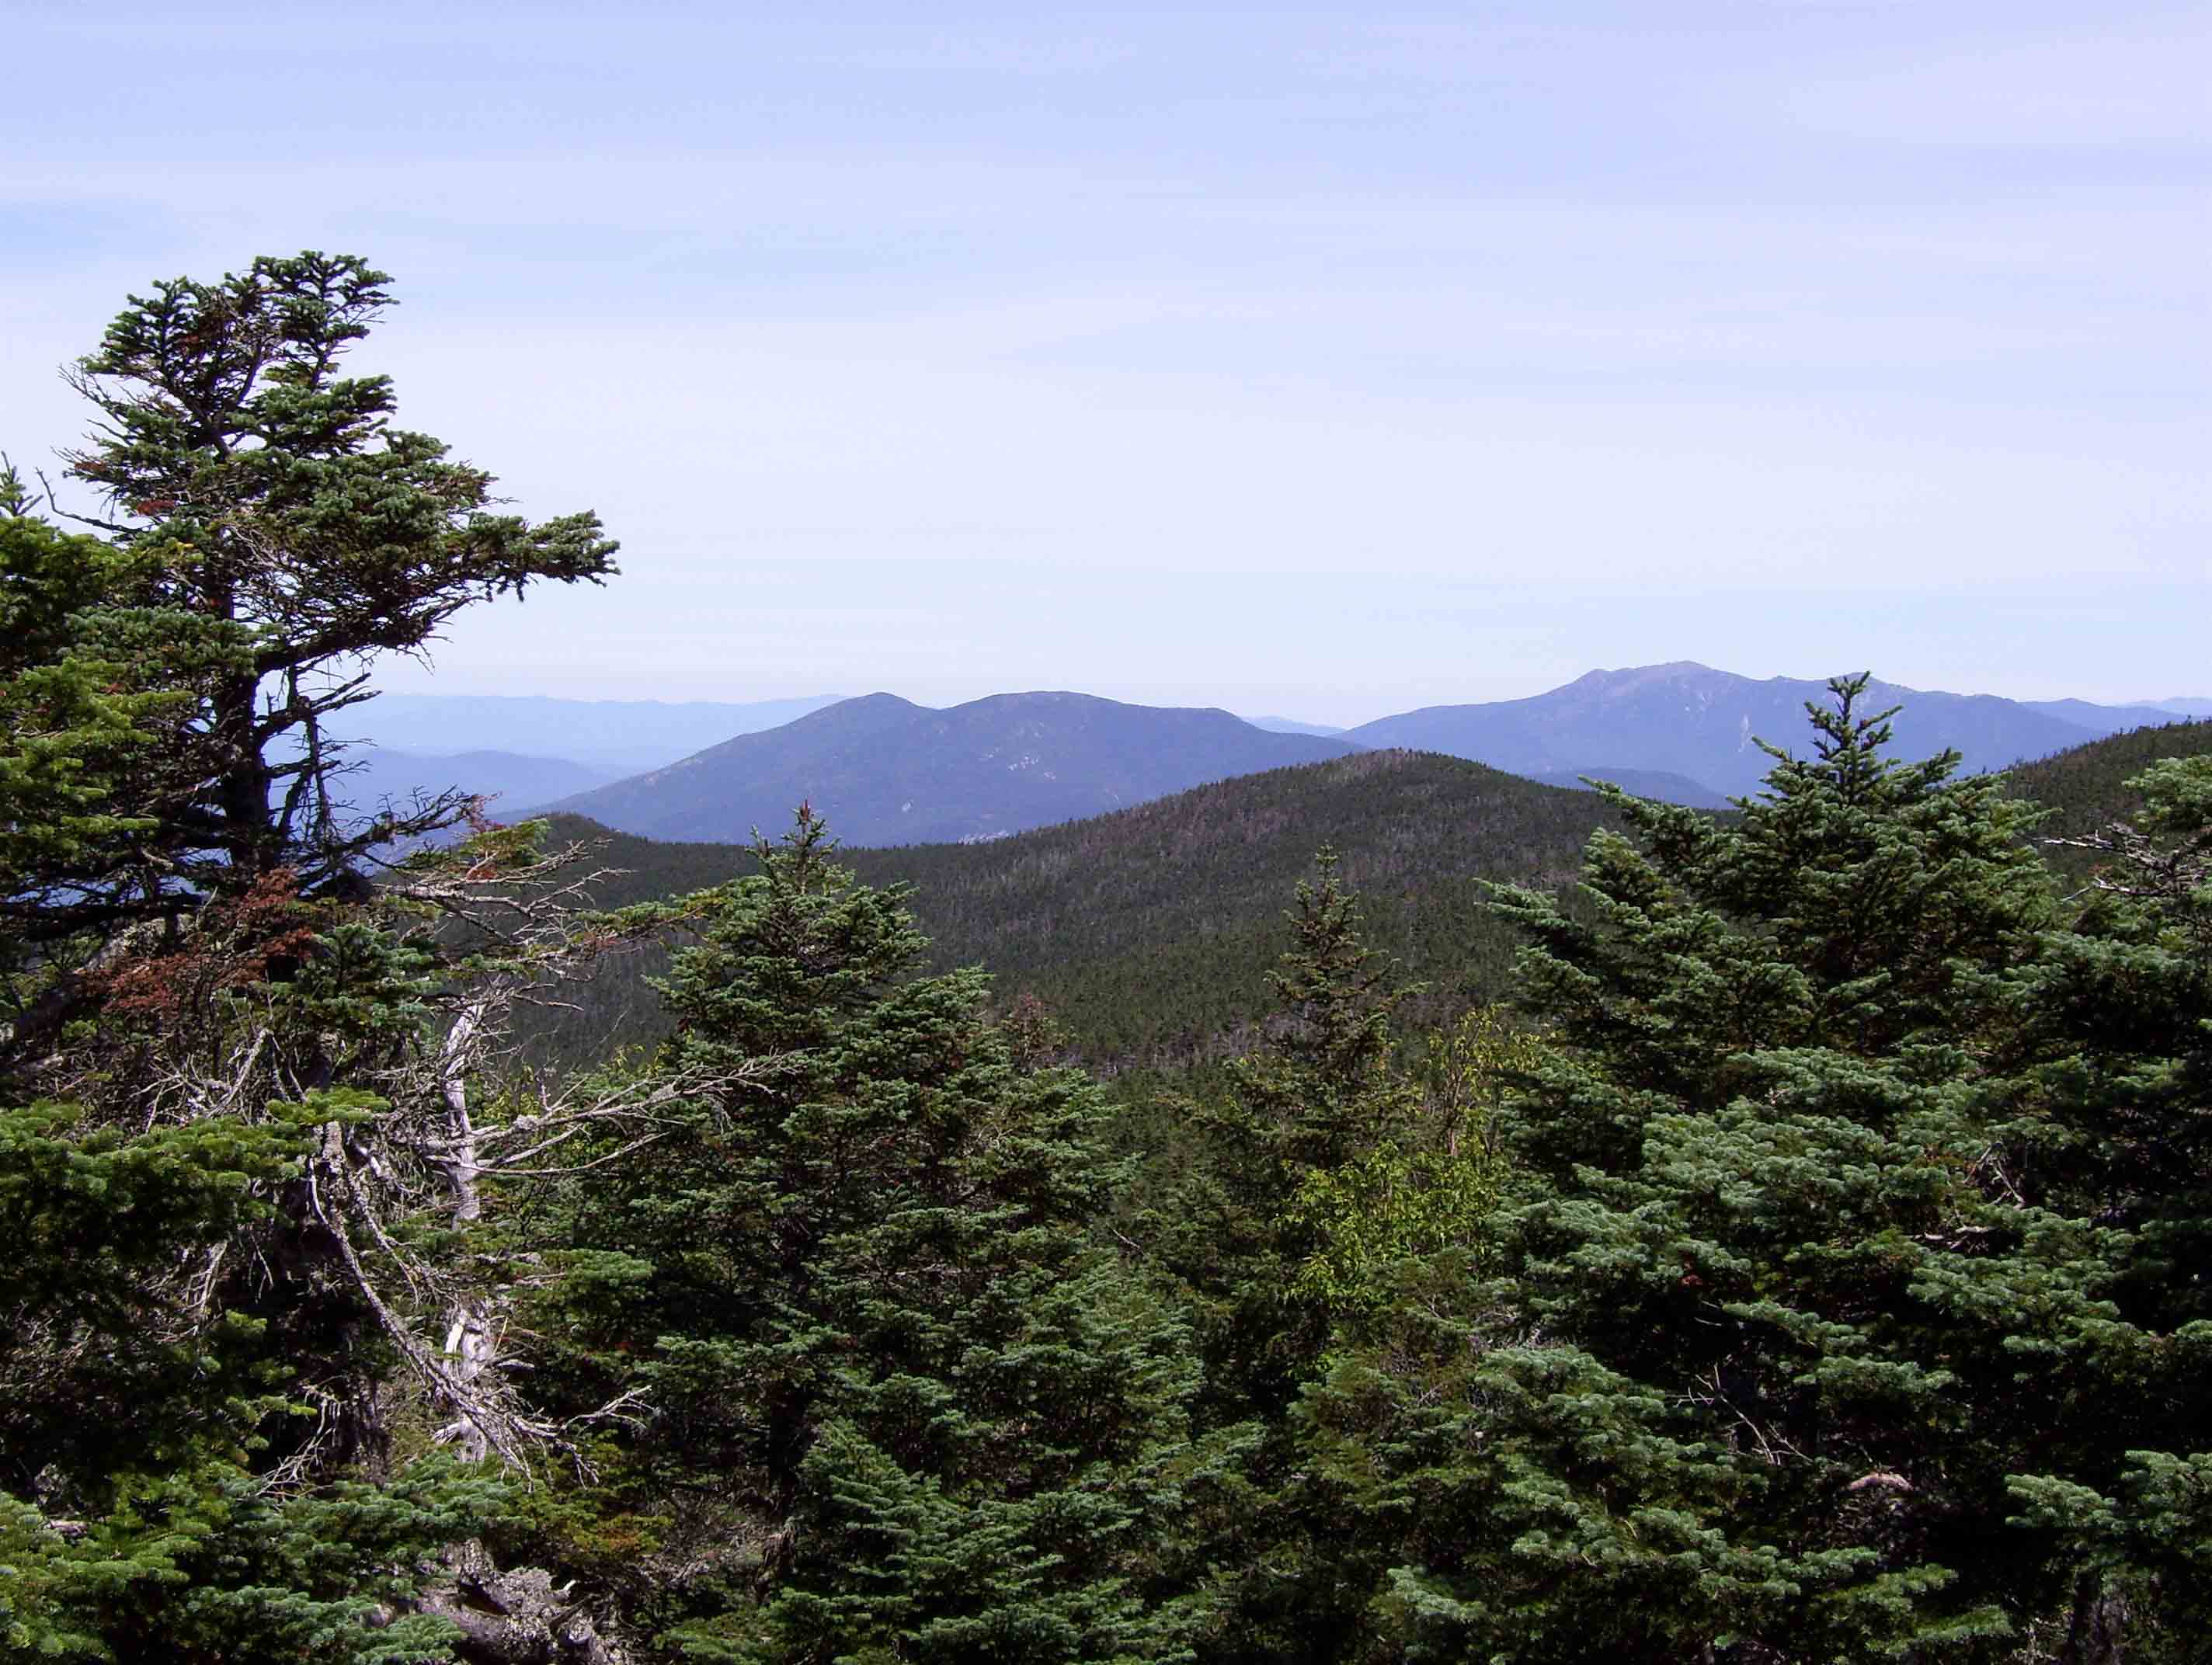 View to the northeast from the Beaverbrook Trail portion of the AT. The mountains in the middle distance are North and South Kinsman. The farther ones are on the Franconia Range with Mt. Lafayette being the highest point. The AT goes over both the Kinsmans and the Franconia Ridge. Taken from approx. Mile 3.2.  Courtesy dlcul@conncoll.edu